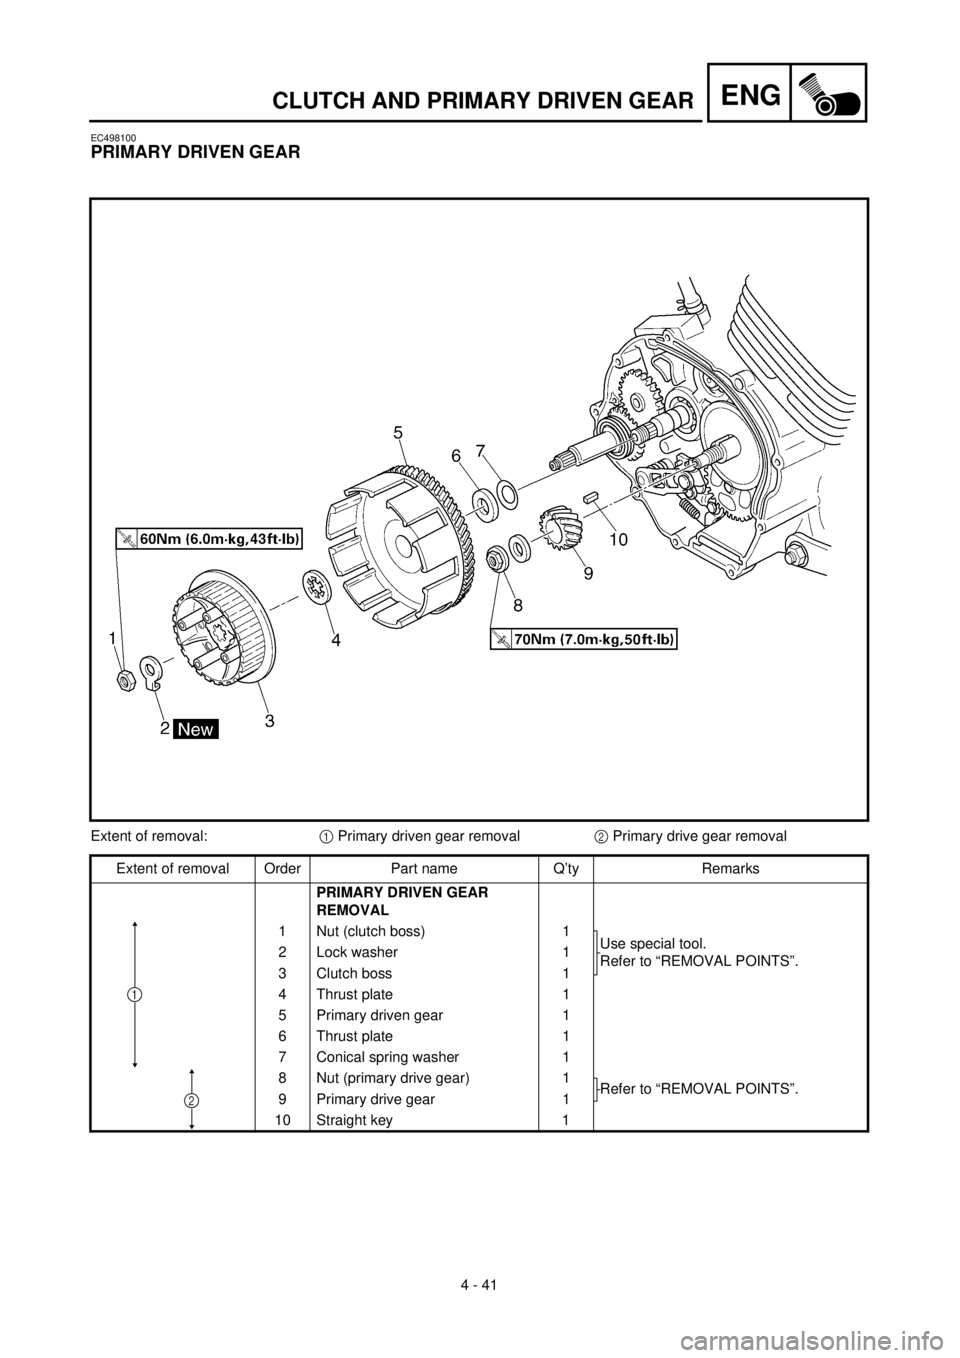 YAMAHA TTR125 2002  Owners Manual 4 - 41
ENGCLUTCH AND PRIMARY DRIVEN GEAR
EC498100
PRIMARY DRIVEN GEAR
Extent of removal:1 Primary driven gear removal2 Primary drive gear removal
Extent of removal Order Part name Q’ty Remarks
PRIMA